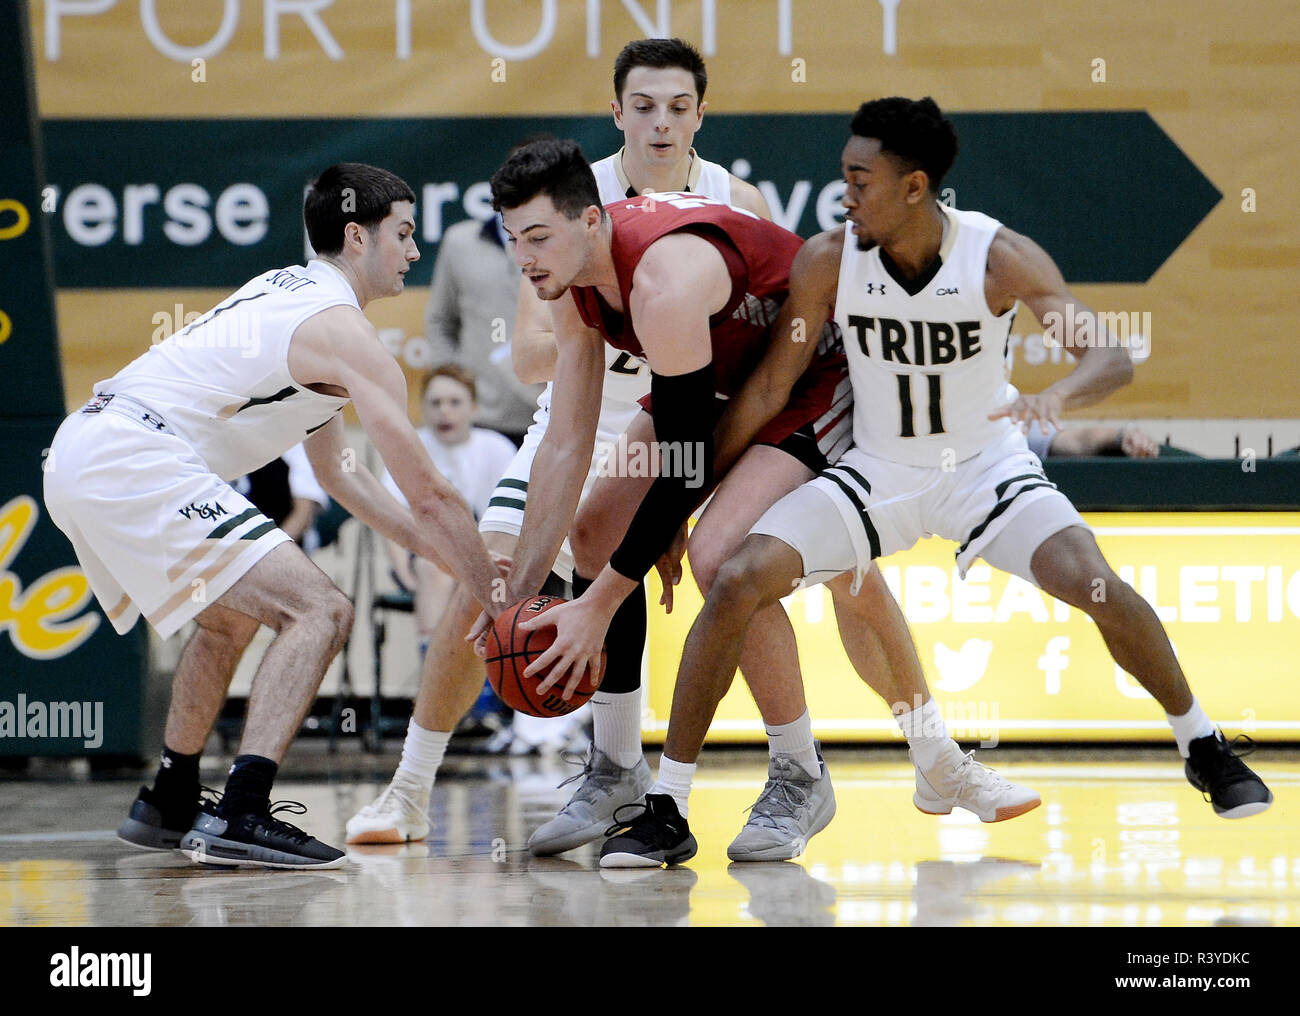 Williamsburg, VA, USA. 24th Nov, 2018. 20181124 - St. Joseph's forward TAYLOR FUNK (33), center, battles to control the ball against the tight defense of William and Mary guard THORNTON SCOTT (1), left, William and Mary forward JUSTIN PIERCE (23), back, and William and Mary guard L.J. OWENS (11) in the first half at Kaplan Arena in Williamsburg, Va. Credit: Chuck Myers/ZUMA Wire/Alamy Live News Stock Photo